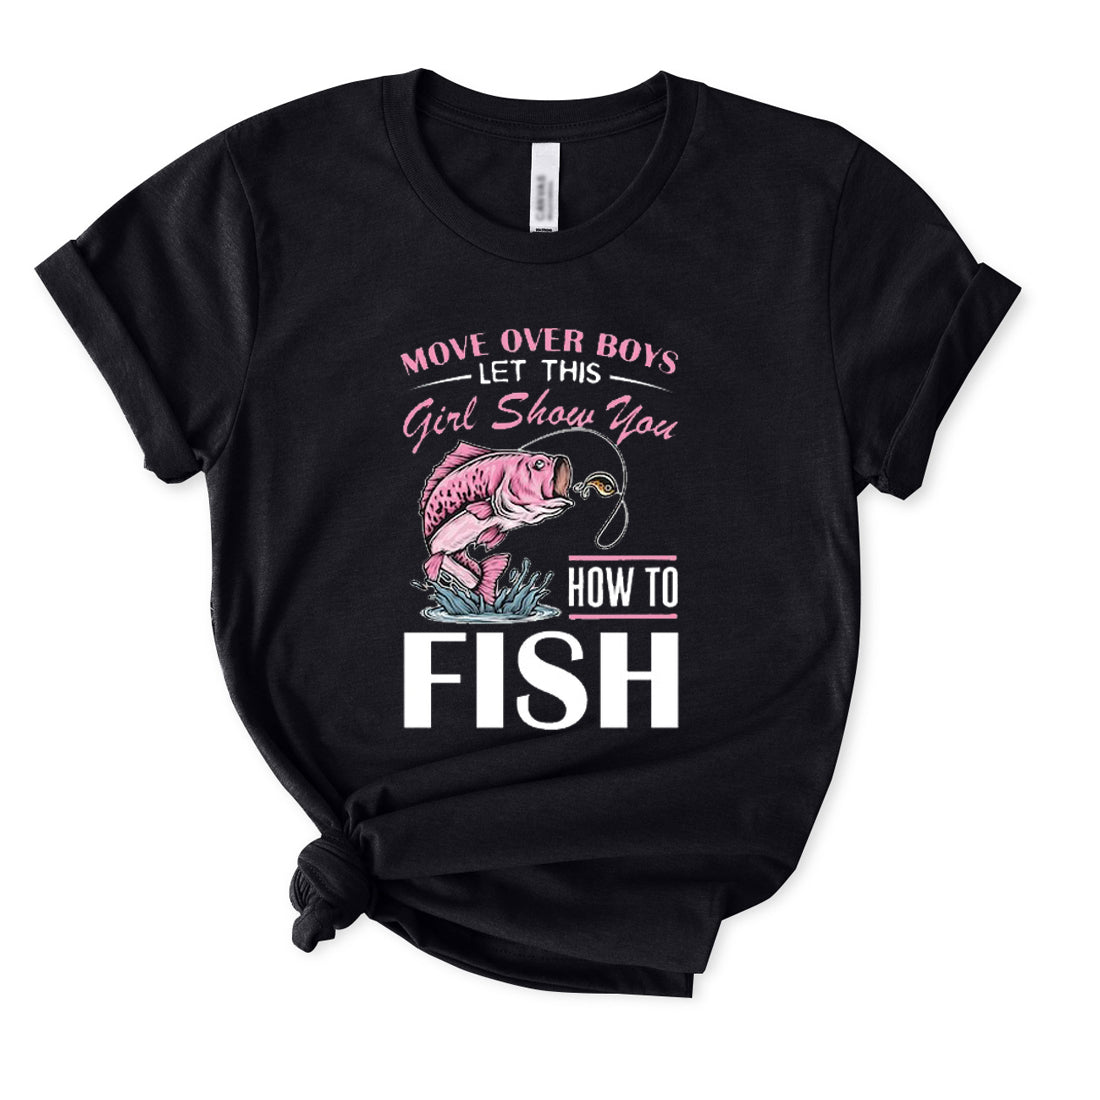 Let This Girl Show You How To Fish T-shirt for Women